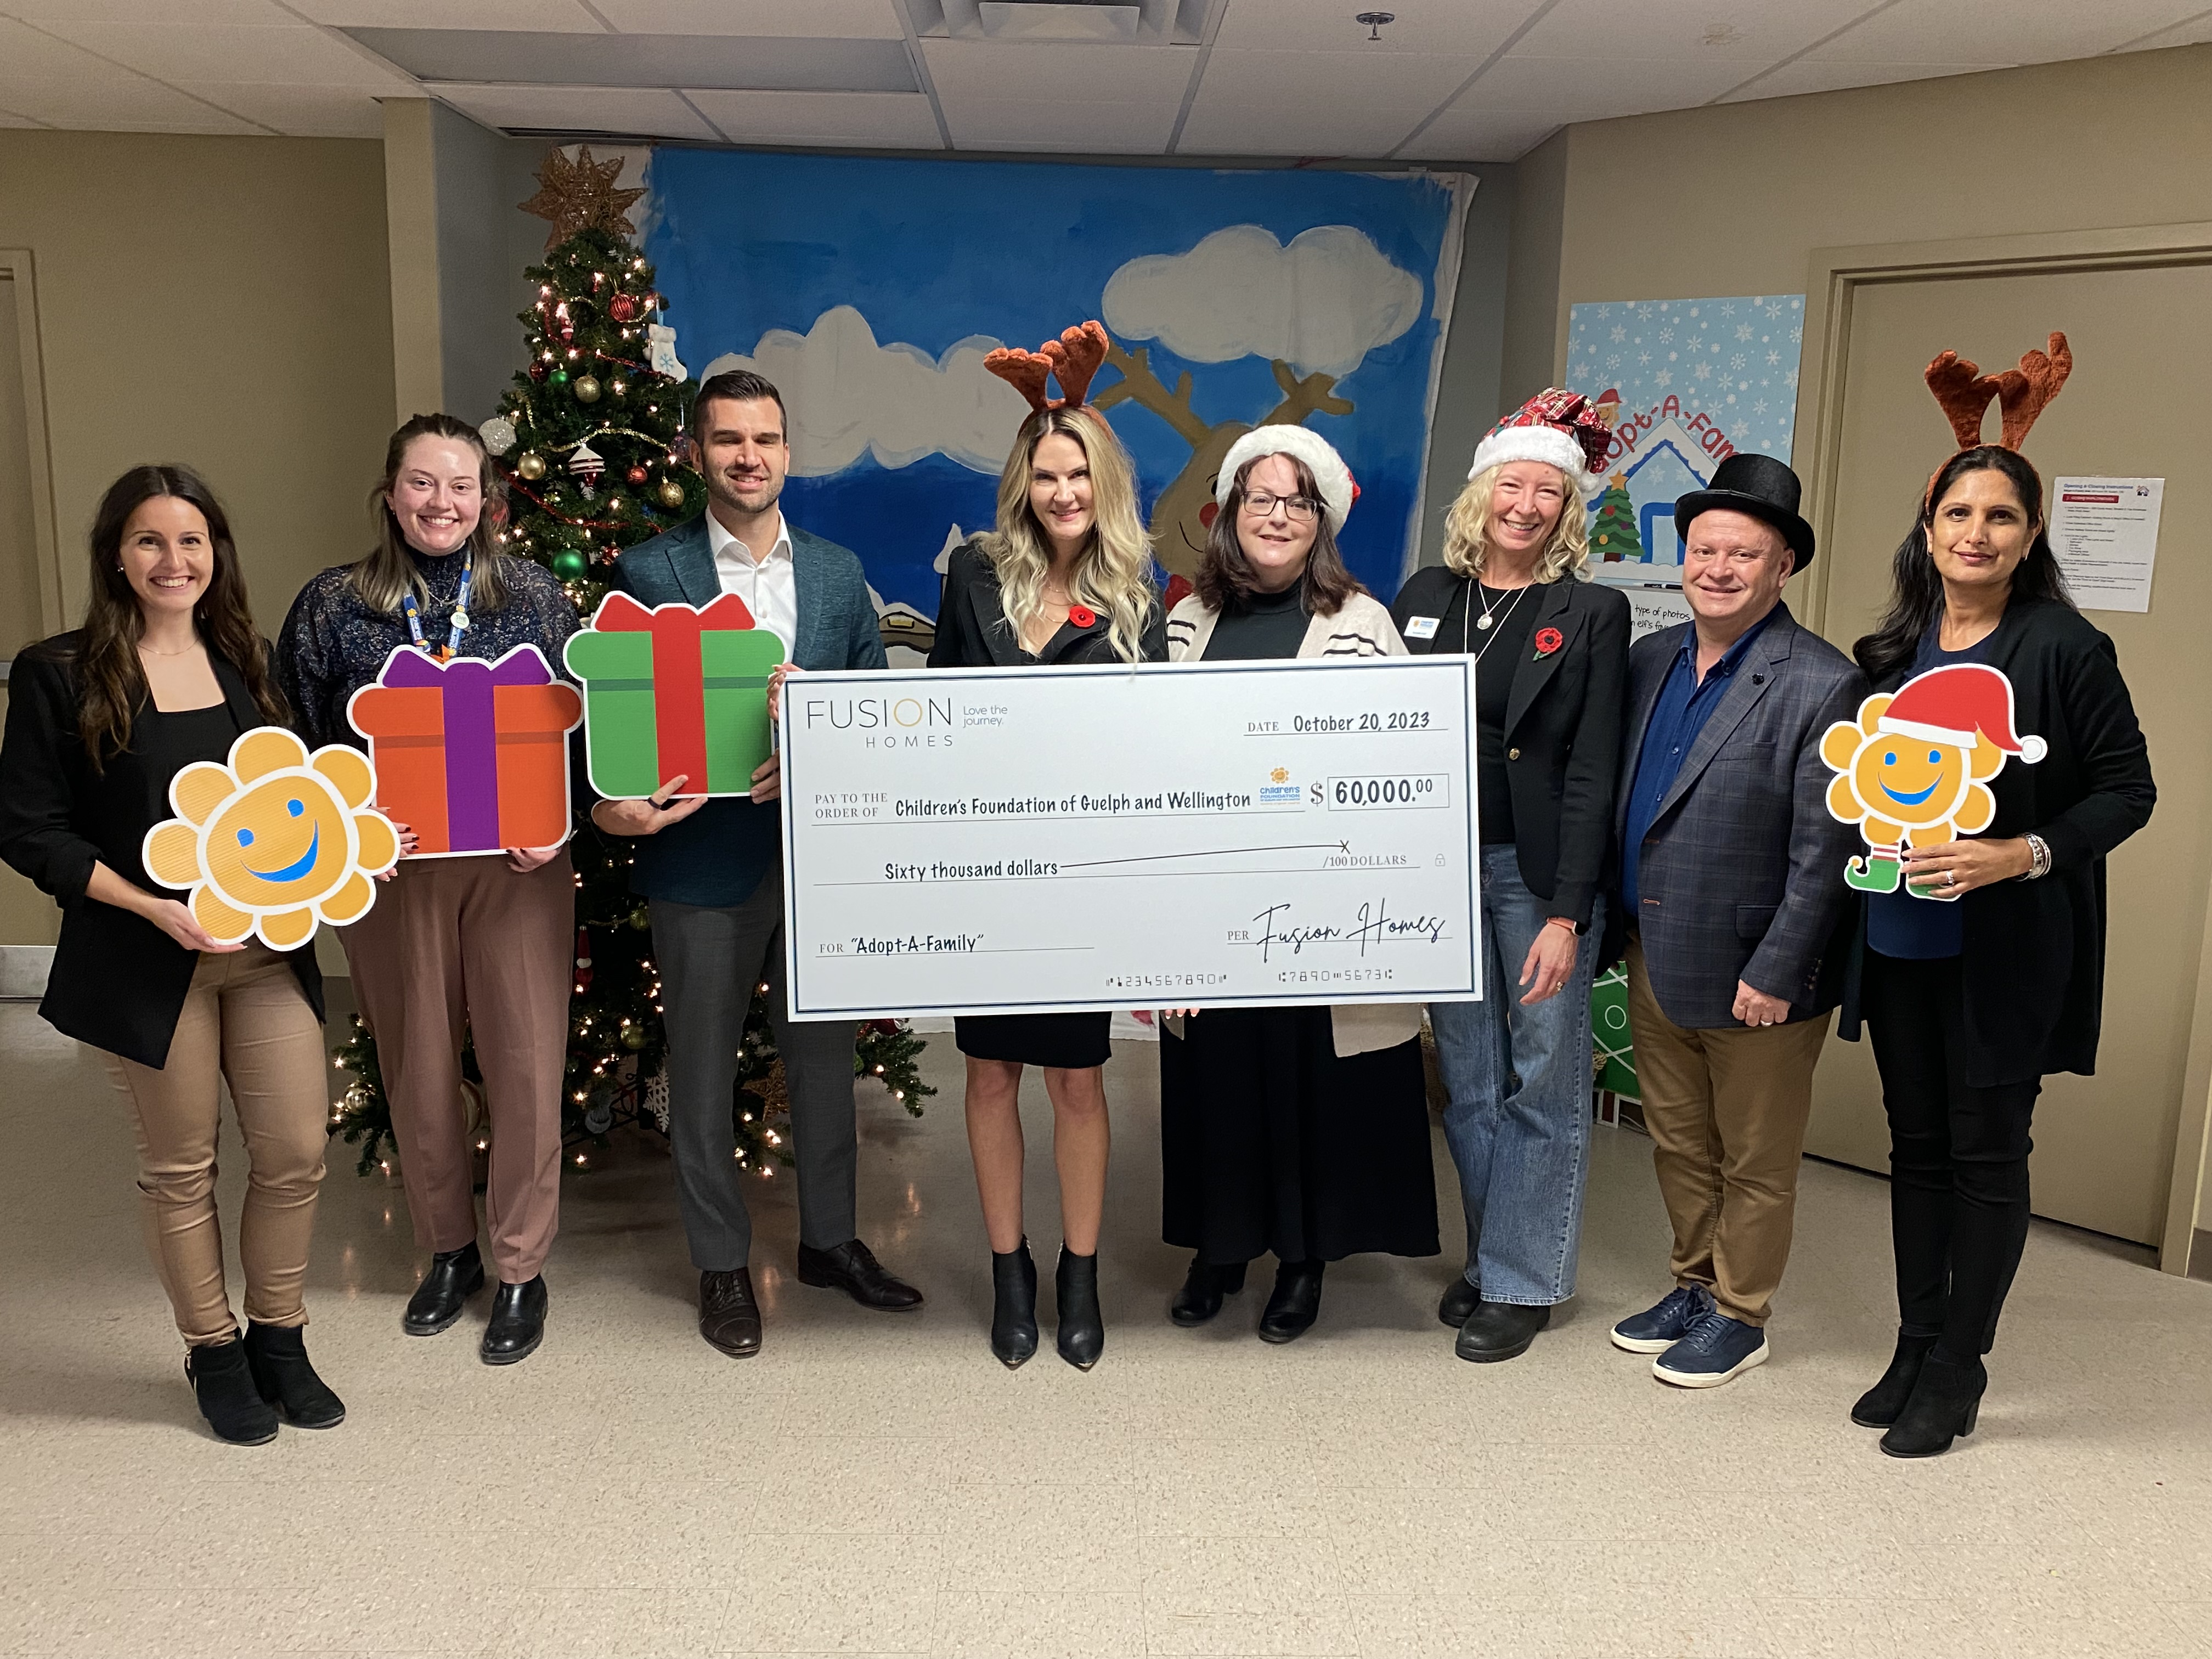 Fusion Homes adds joy to Guelph families through donation to Adopt-a-Family program